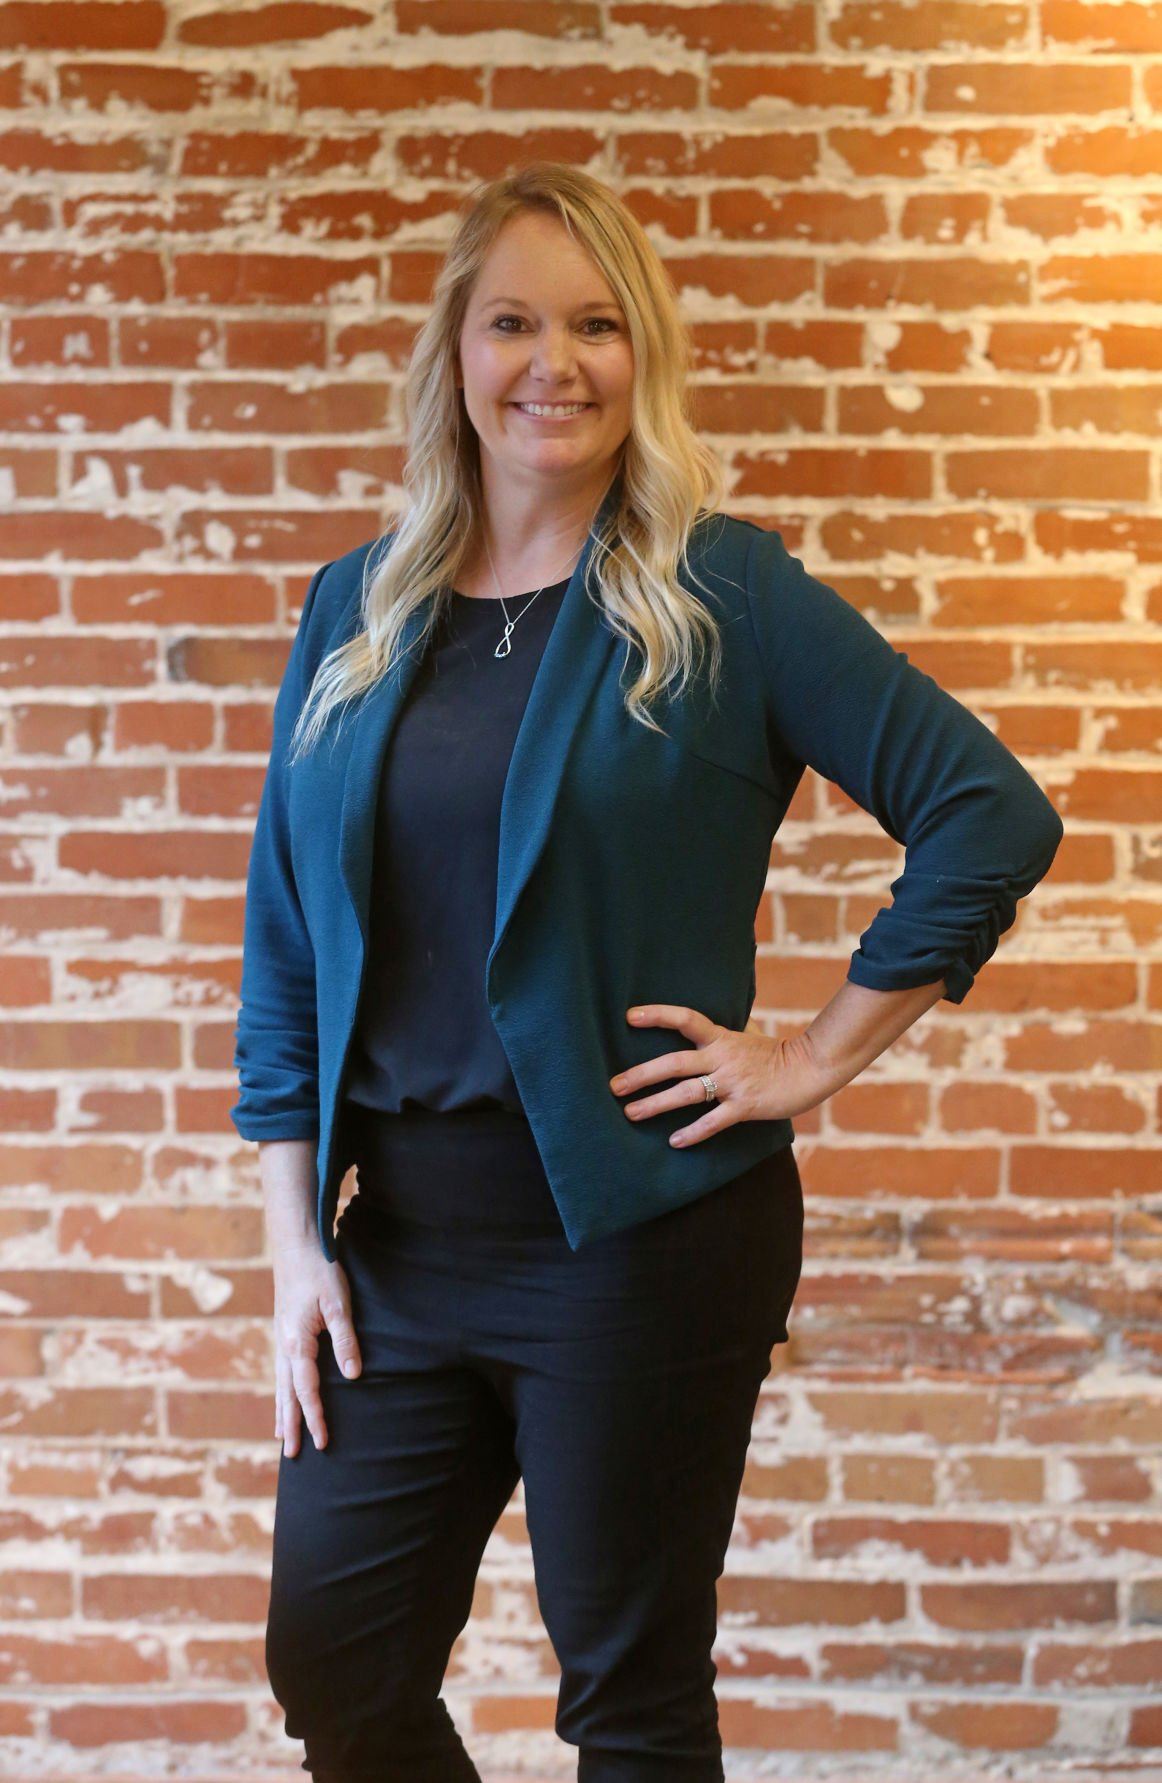 Mandi Dolson is director of workforce recruitment & retention at Greater Dubuque Development Corp.    PHOTO CREDIT: Jessica Reilly